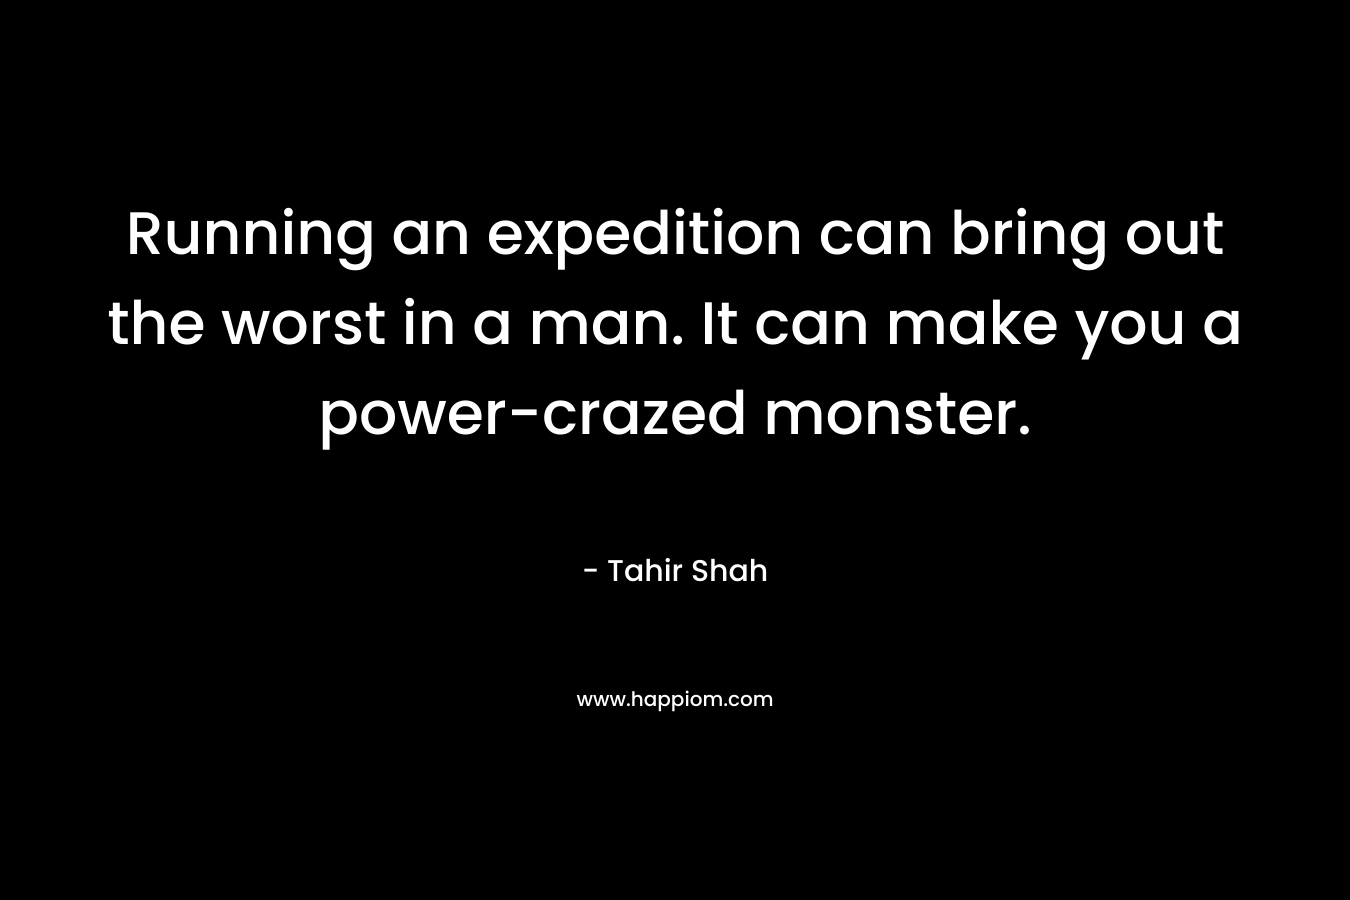 Running an expedition can bring out the worst in a man. It can make you a power-crazed monster. – Tahir Shah